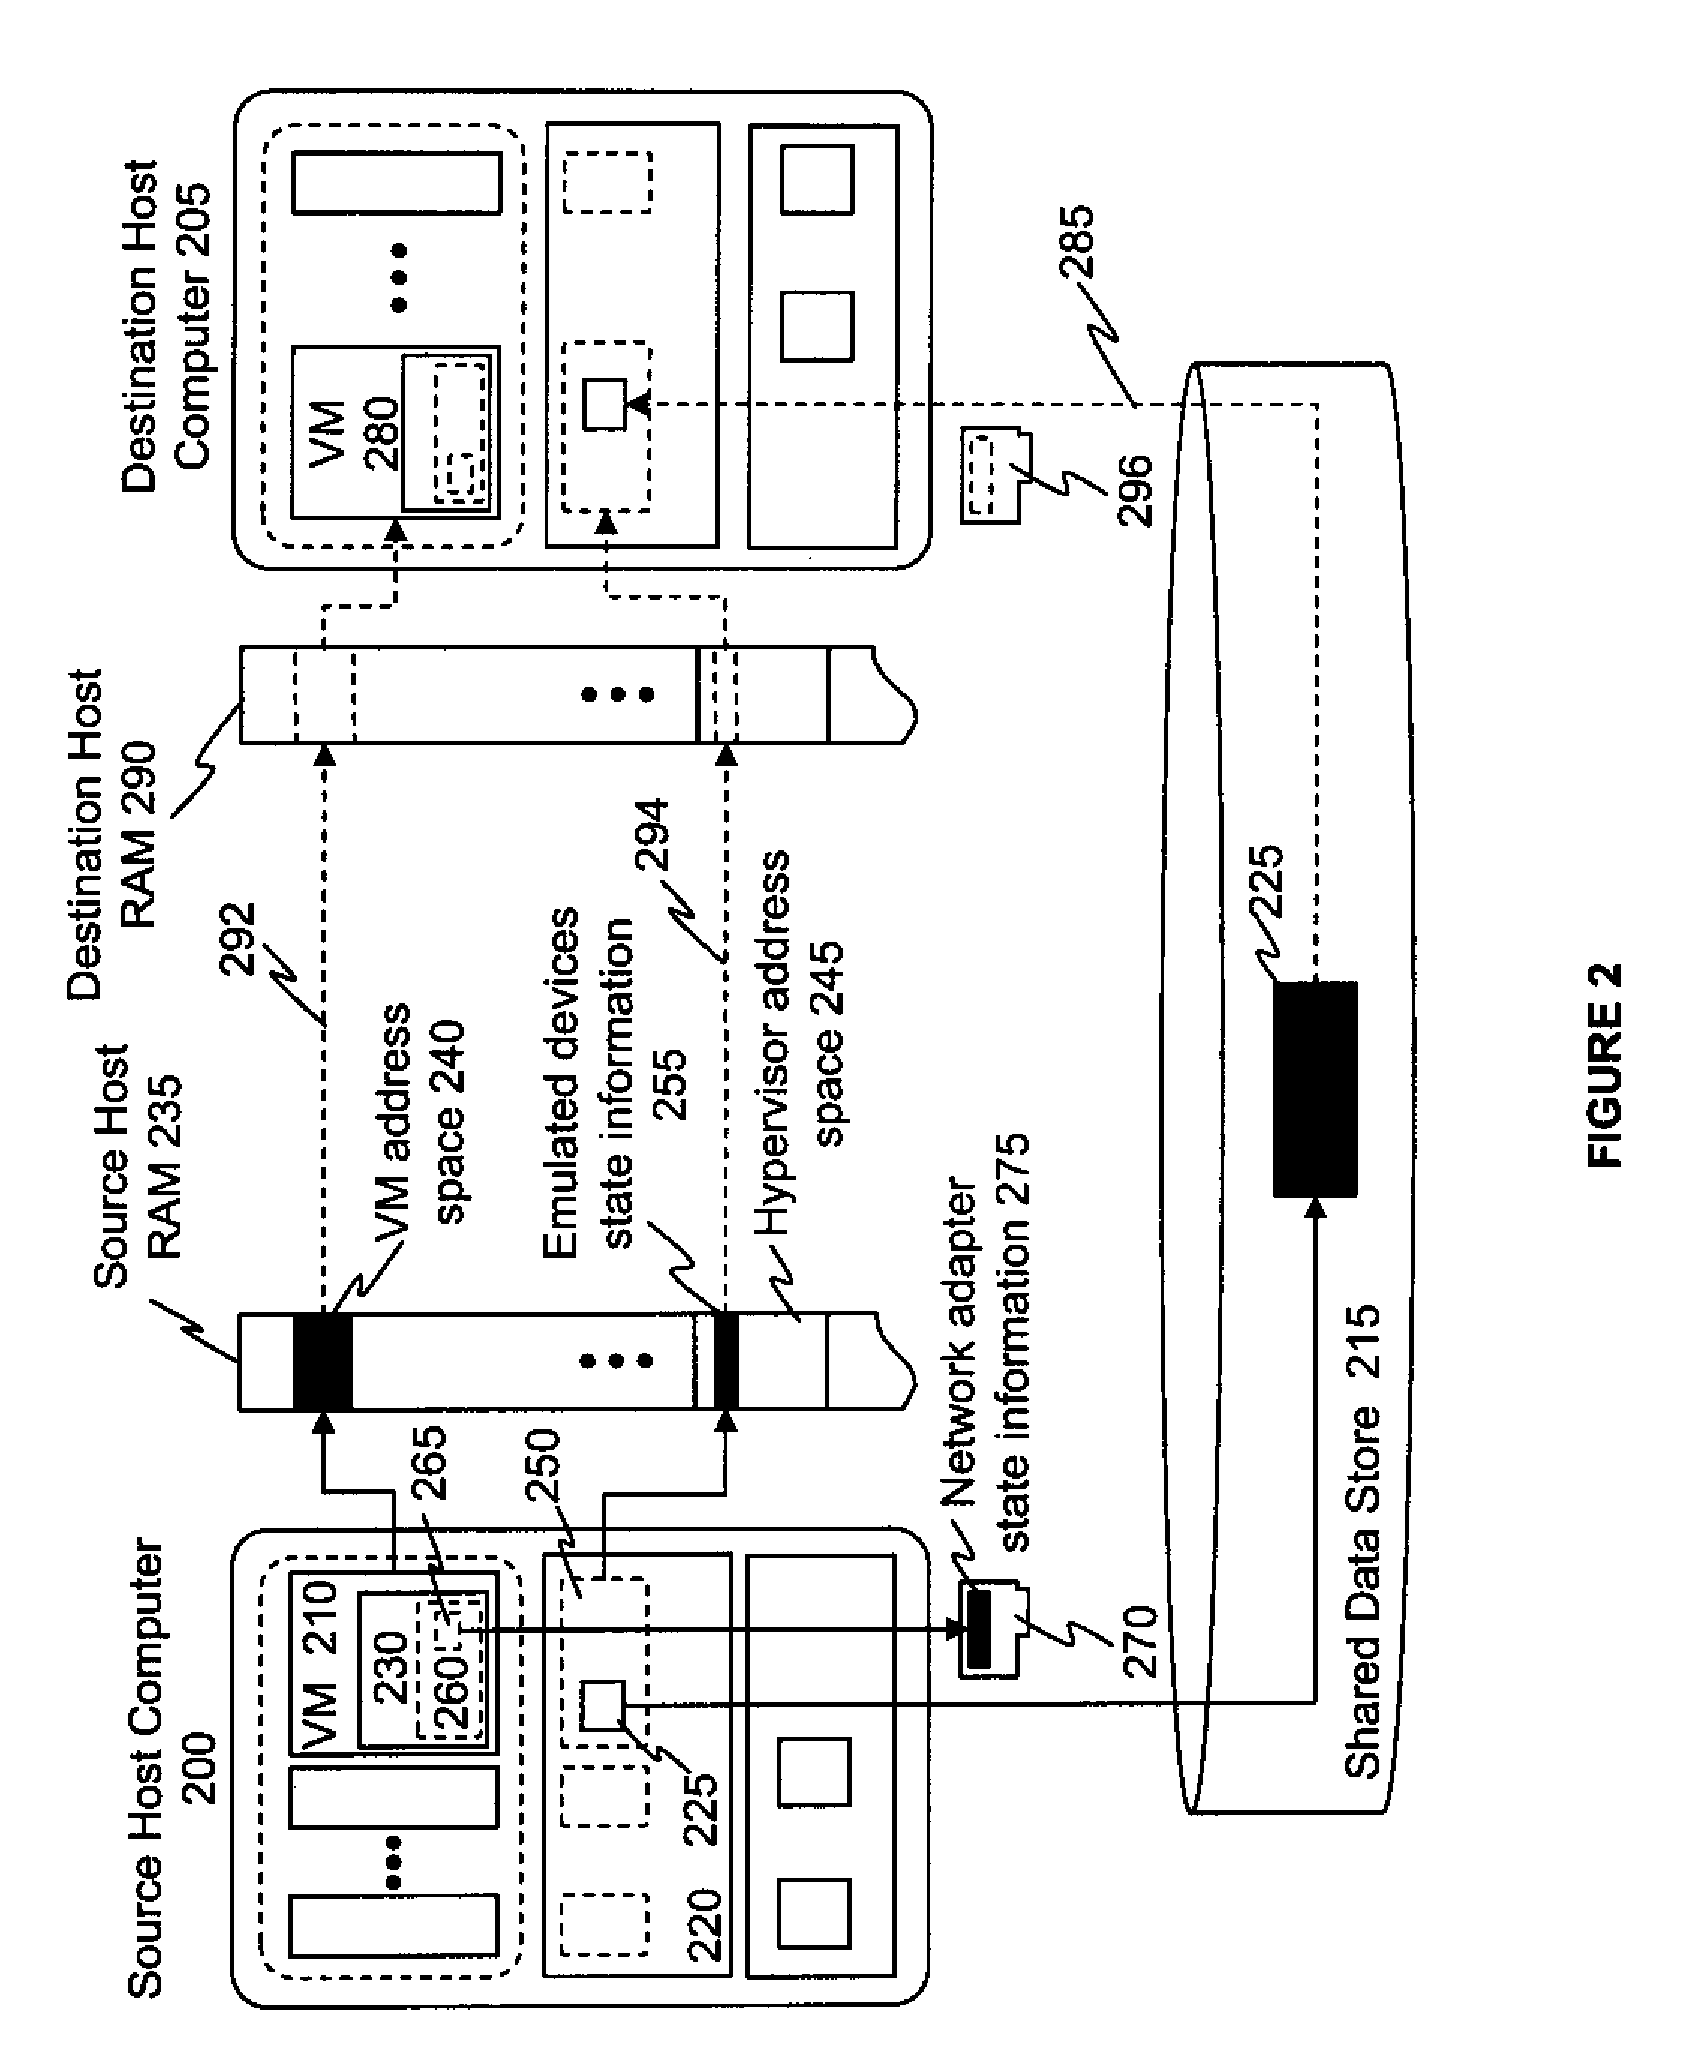 Migrating virtual machines configured with pass-through devices